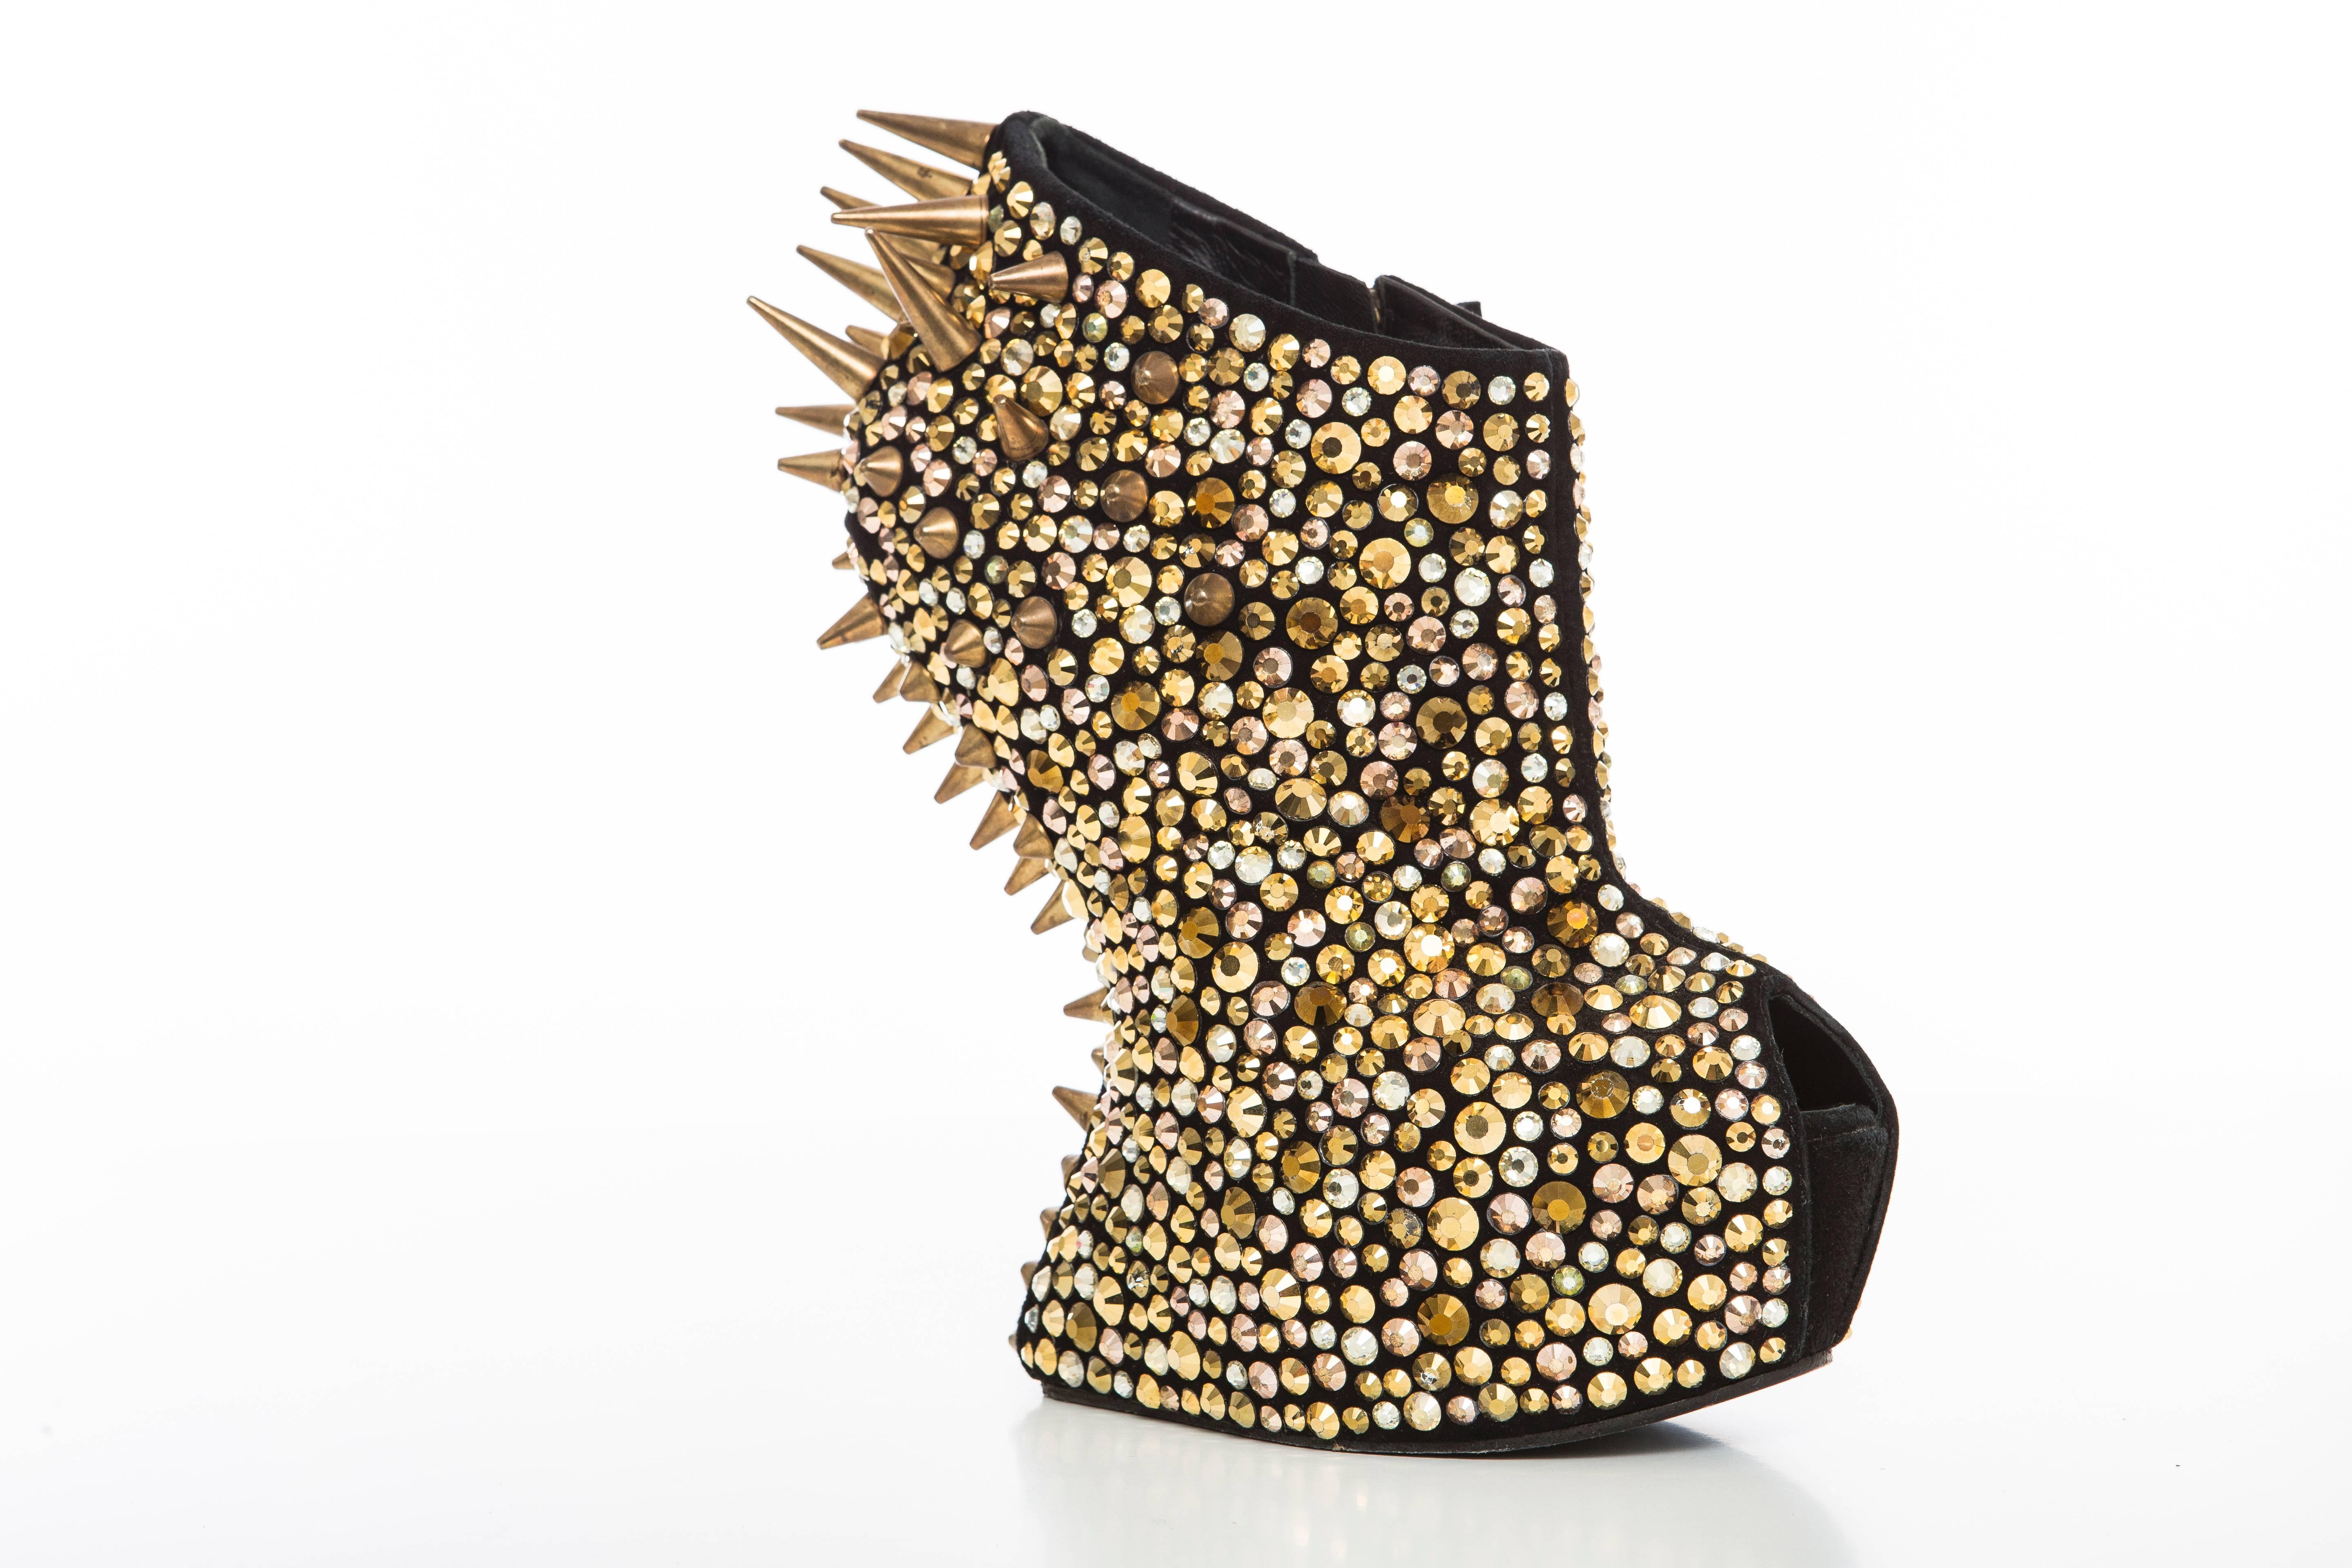  Giuseppe Zanotti, Autumn-Winter 2012, black suede platform booties with gold-tone hardware, stud embellishments throughout featuring spike embellishments at counters, concealed platforms and sculpted heels and zip closures at inner